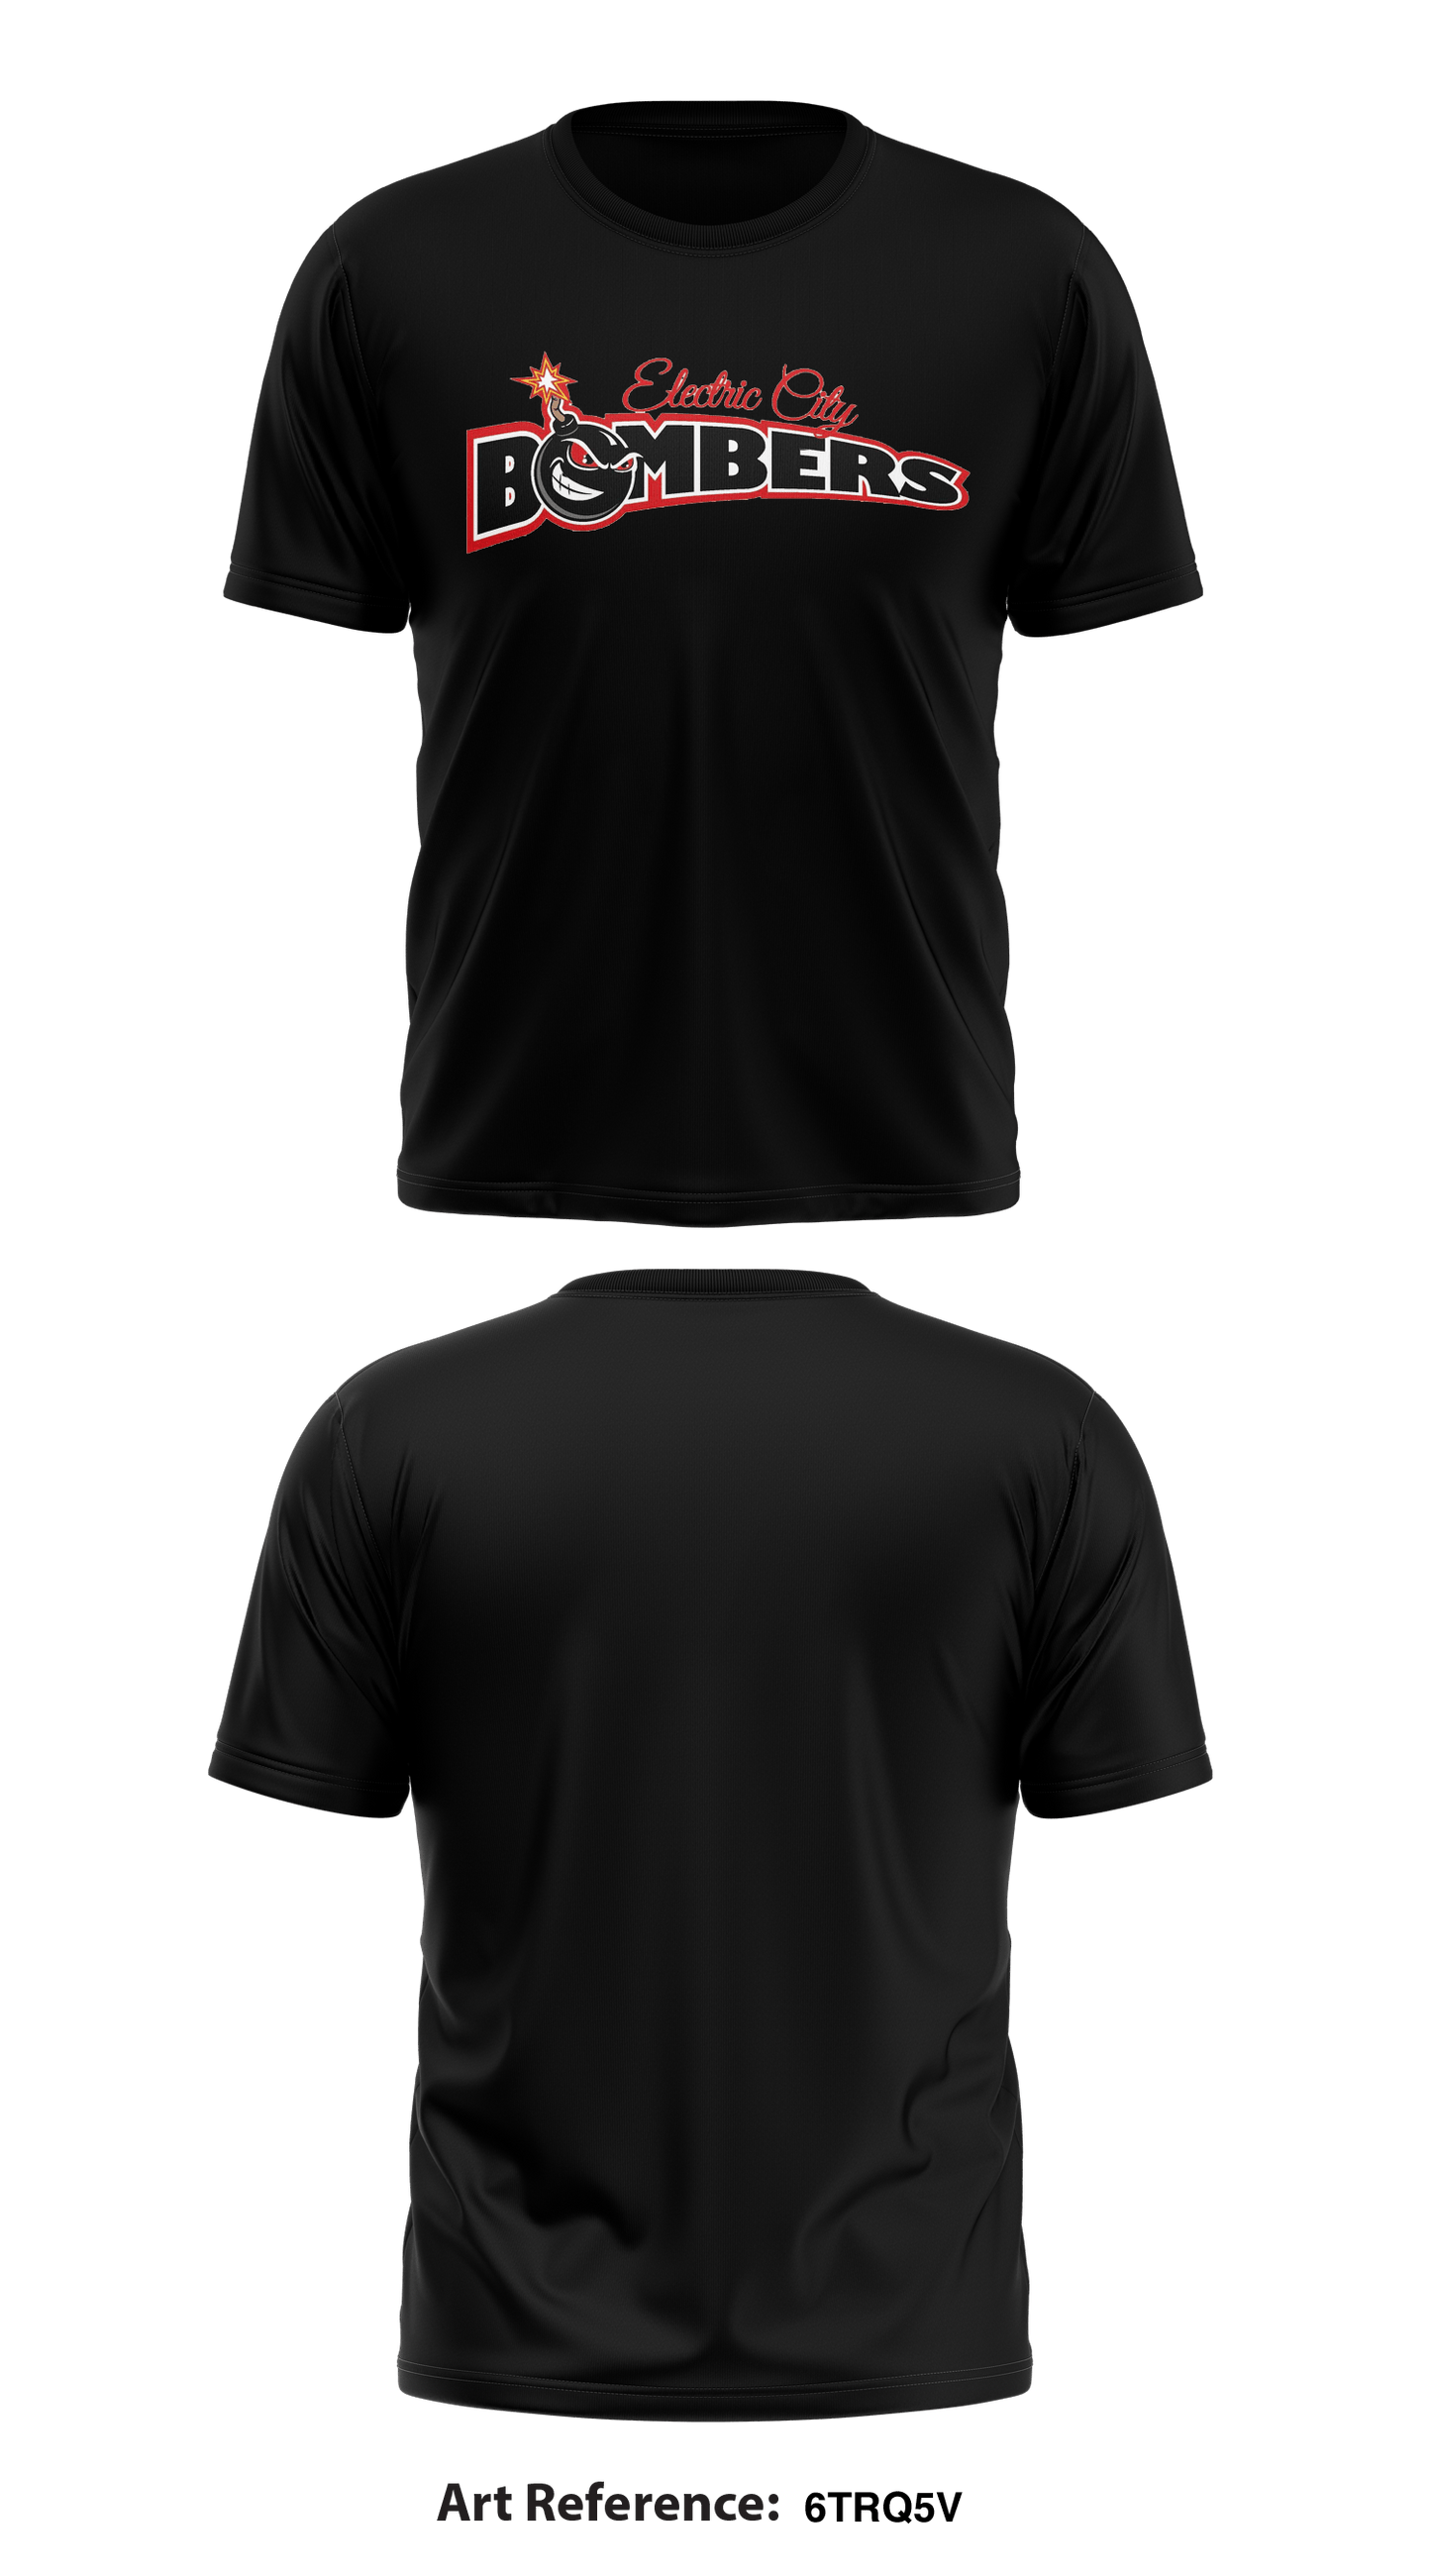 Electric City Bombers  Store 2 Core Men's SS Performance Tee - 6TRq5v